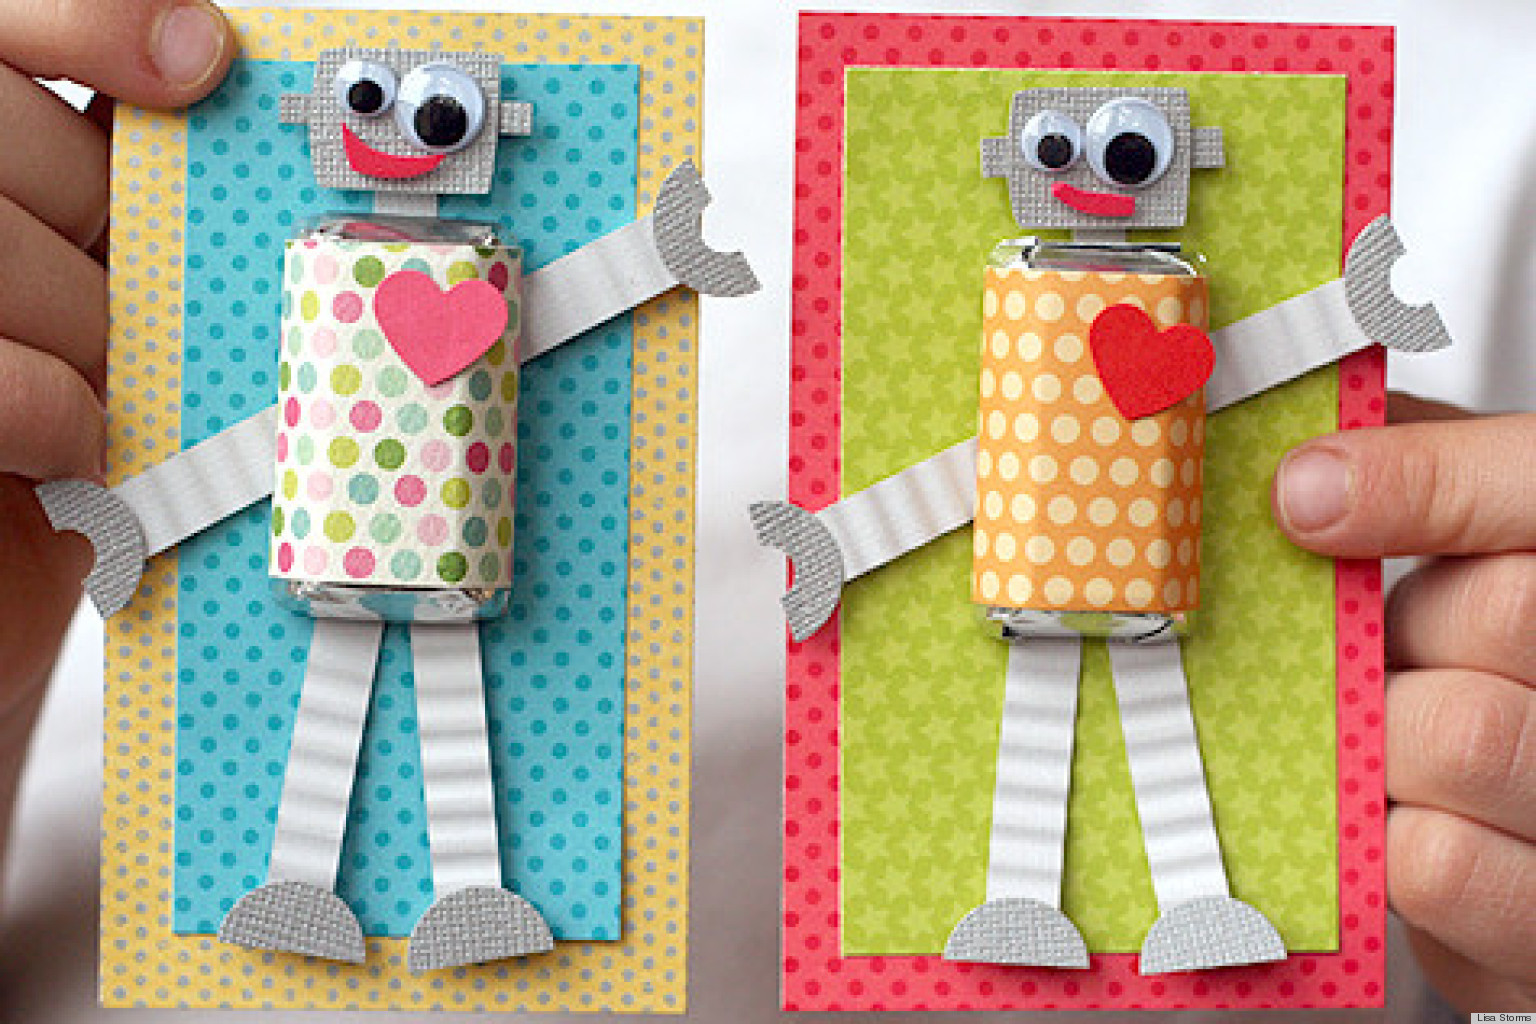 DIY Valentine Gifts For Kids
 Valentine s Day Ideas Make These Adorable DIY Robot Cards